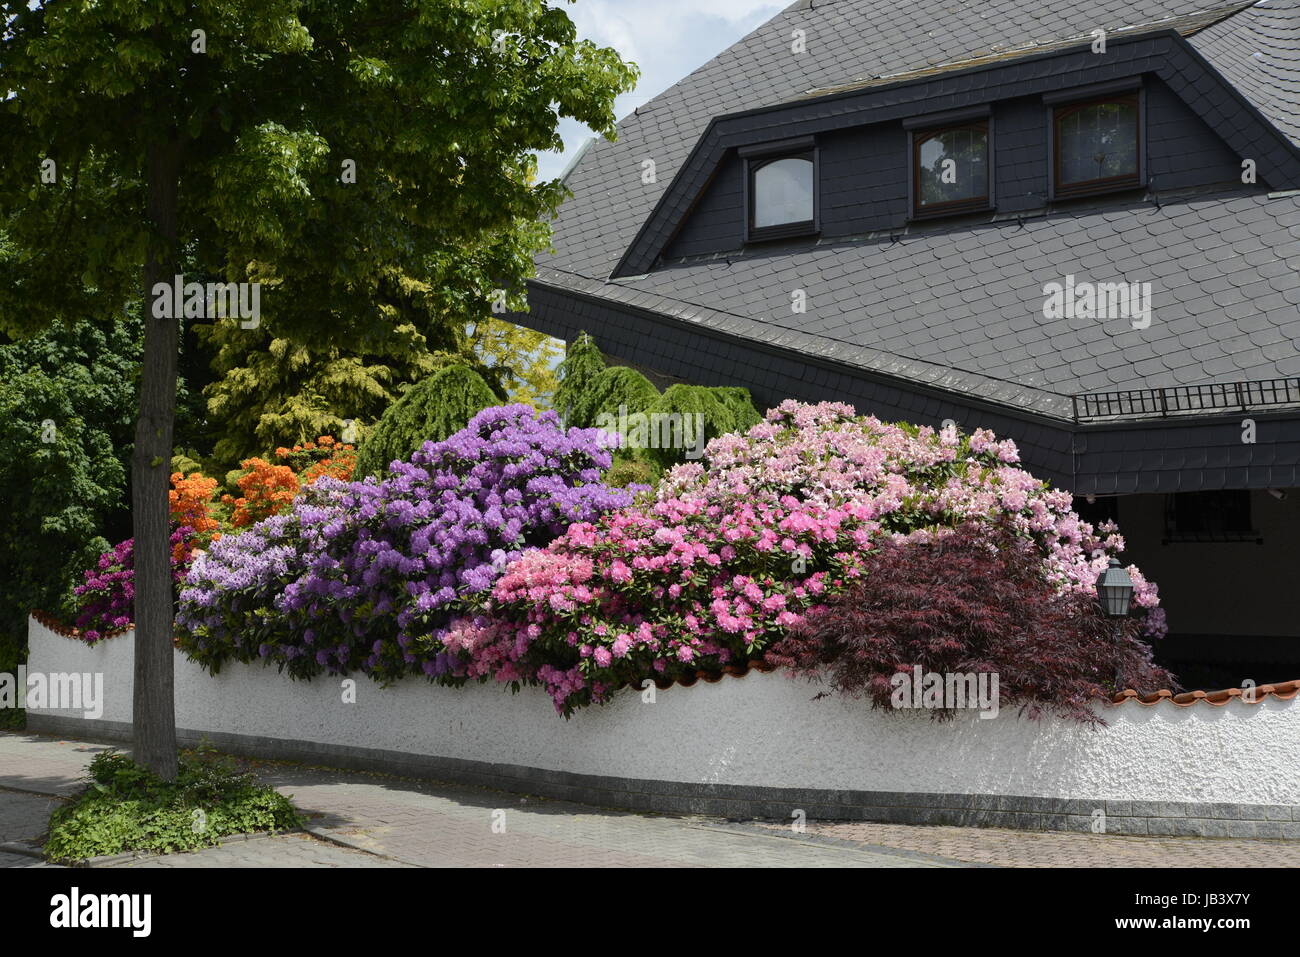 Page 2 - Mauer Garten High Resolution Stock Photography and Images - Alamy